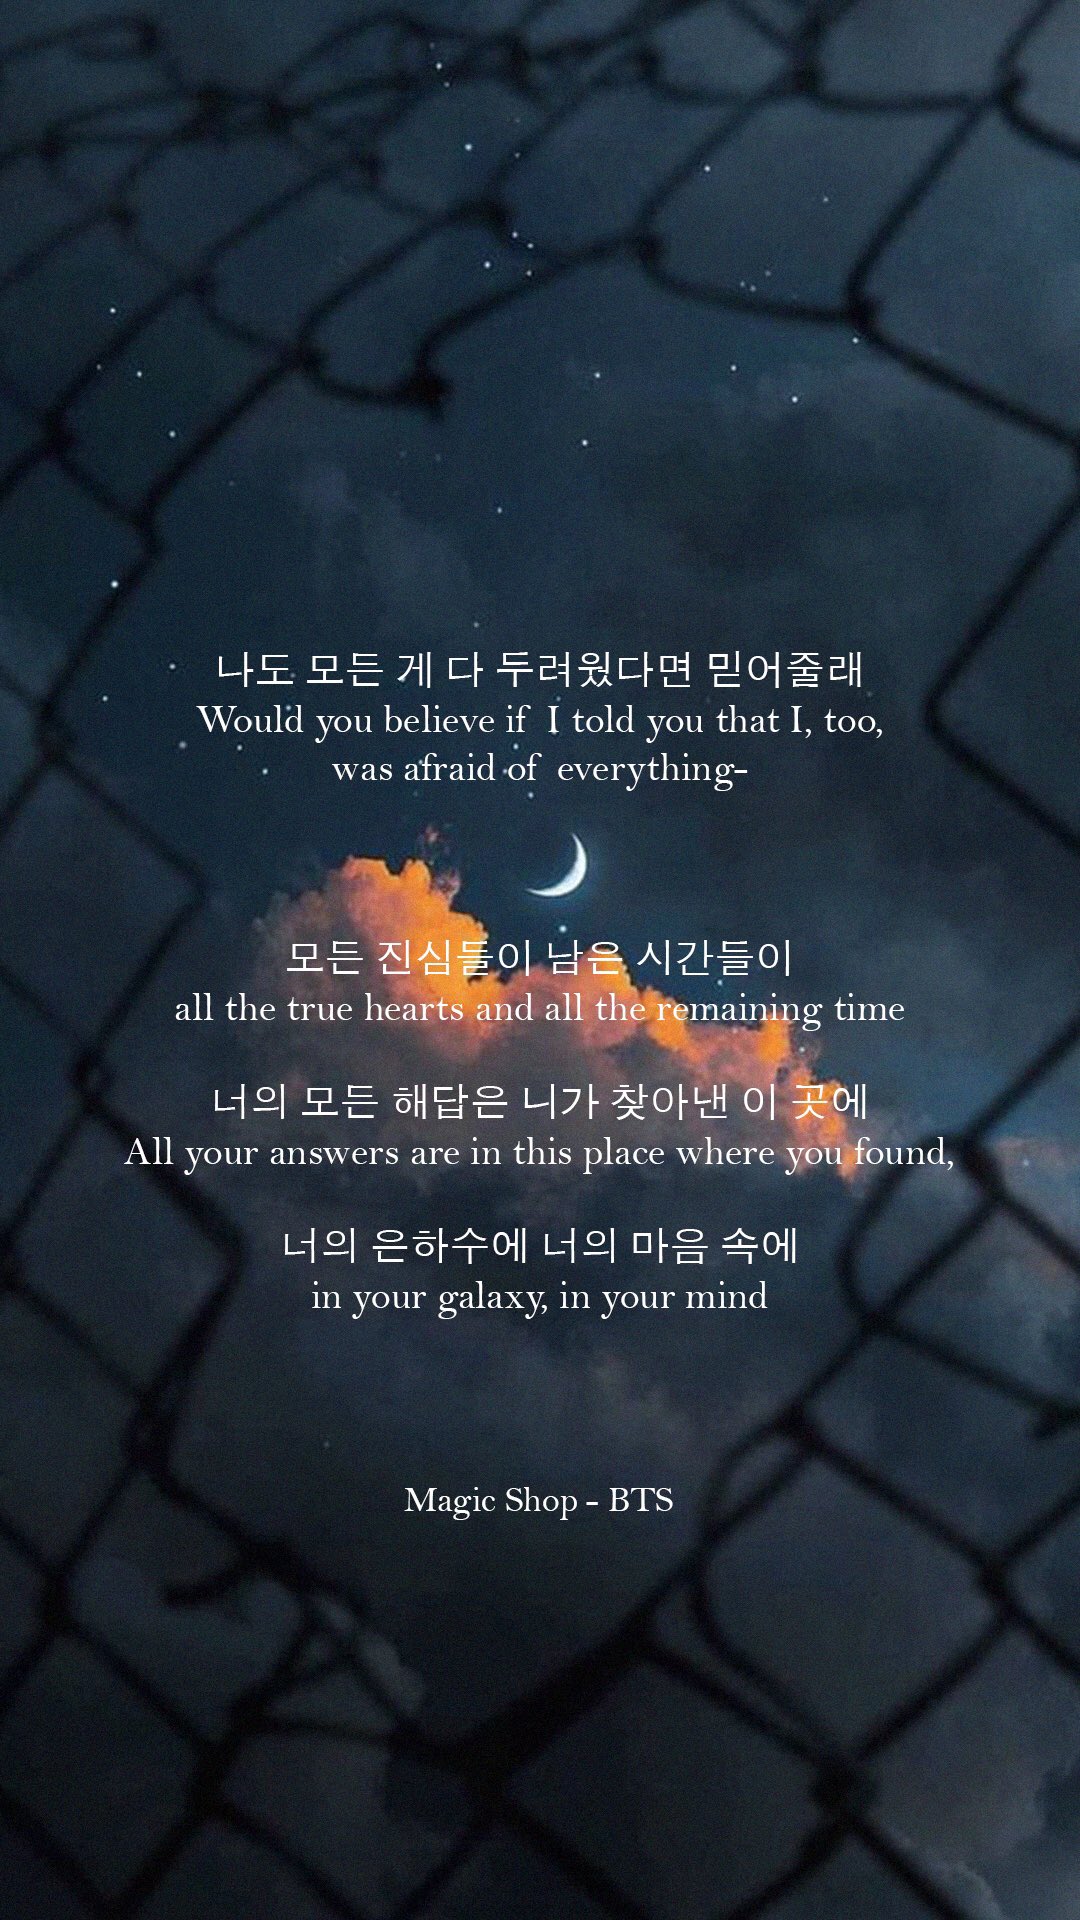 I believe in you i believe in your mind lyrics Bts Lyrics On Twitter In Your Galaxy In Your Mind Magic Shop Bts Engtrans By Doolsetbangtan Https T Co Iccjwcdizc Lyrics Quotes Inspiration Wallpaper Lockscreen Aesthetic Mood Magic Magicshop Galaxy Bts Https T Co Npubo7ceon